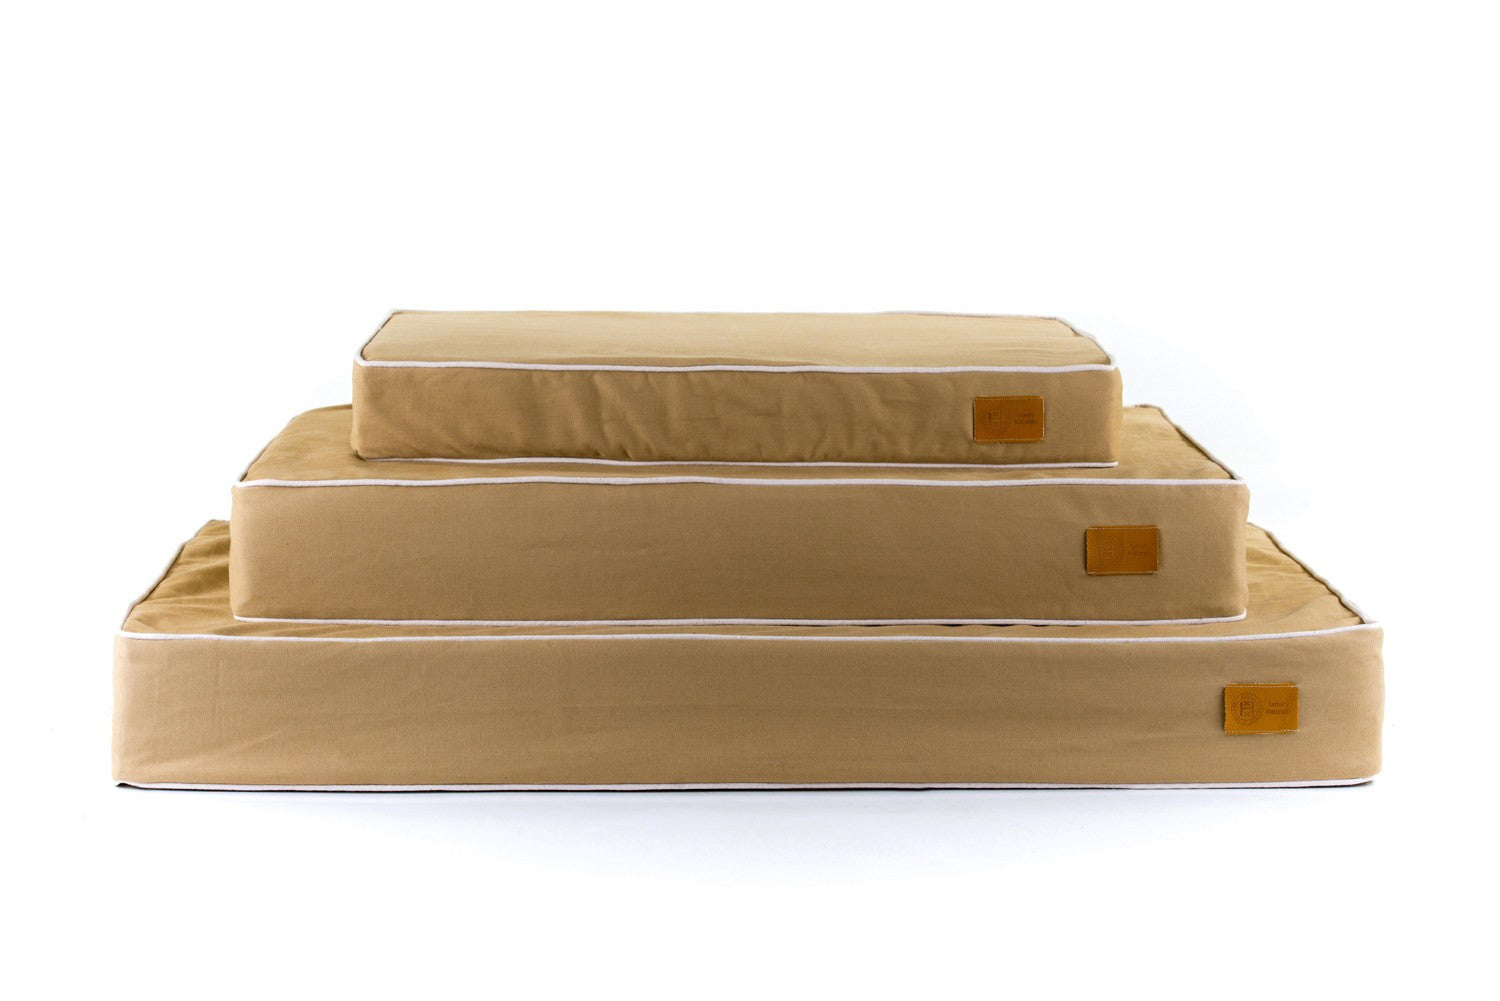 Cream and sand stack of Classic Natural luxury dog beds. Made in Britain using organic materials and British wool.